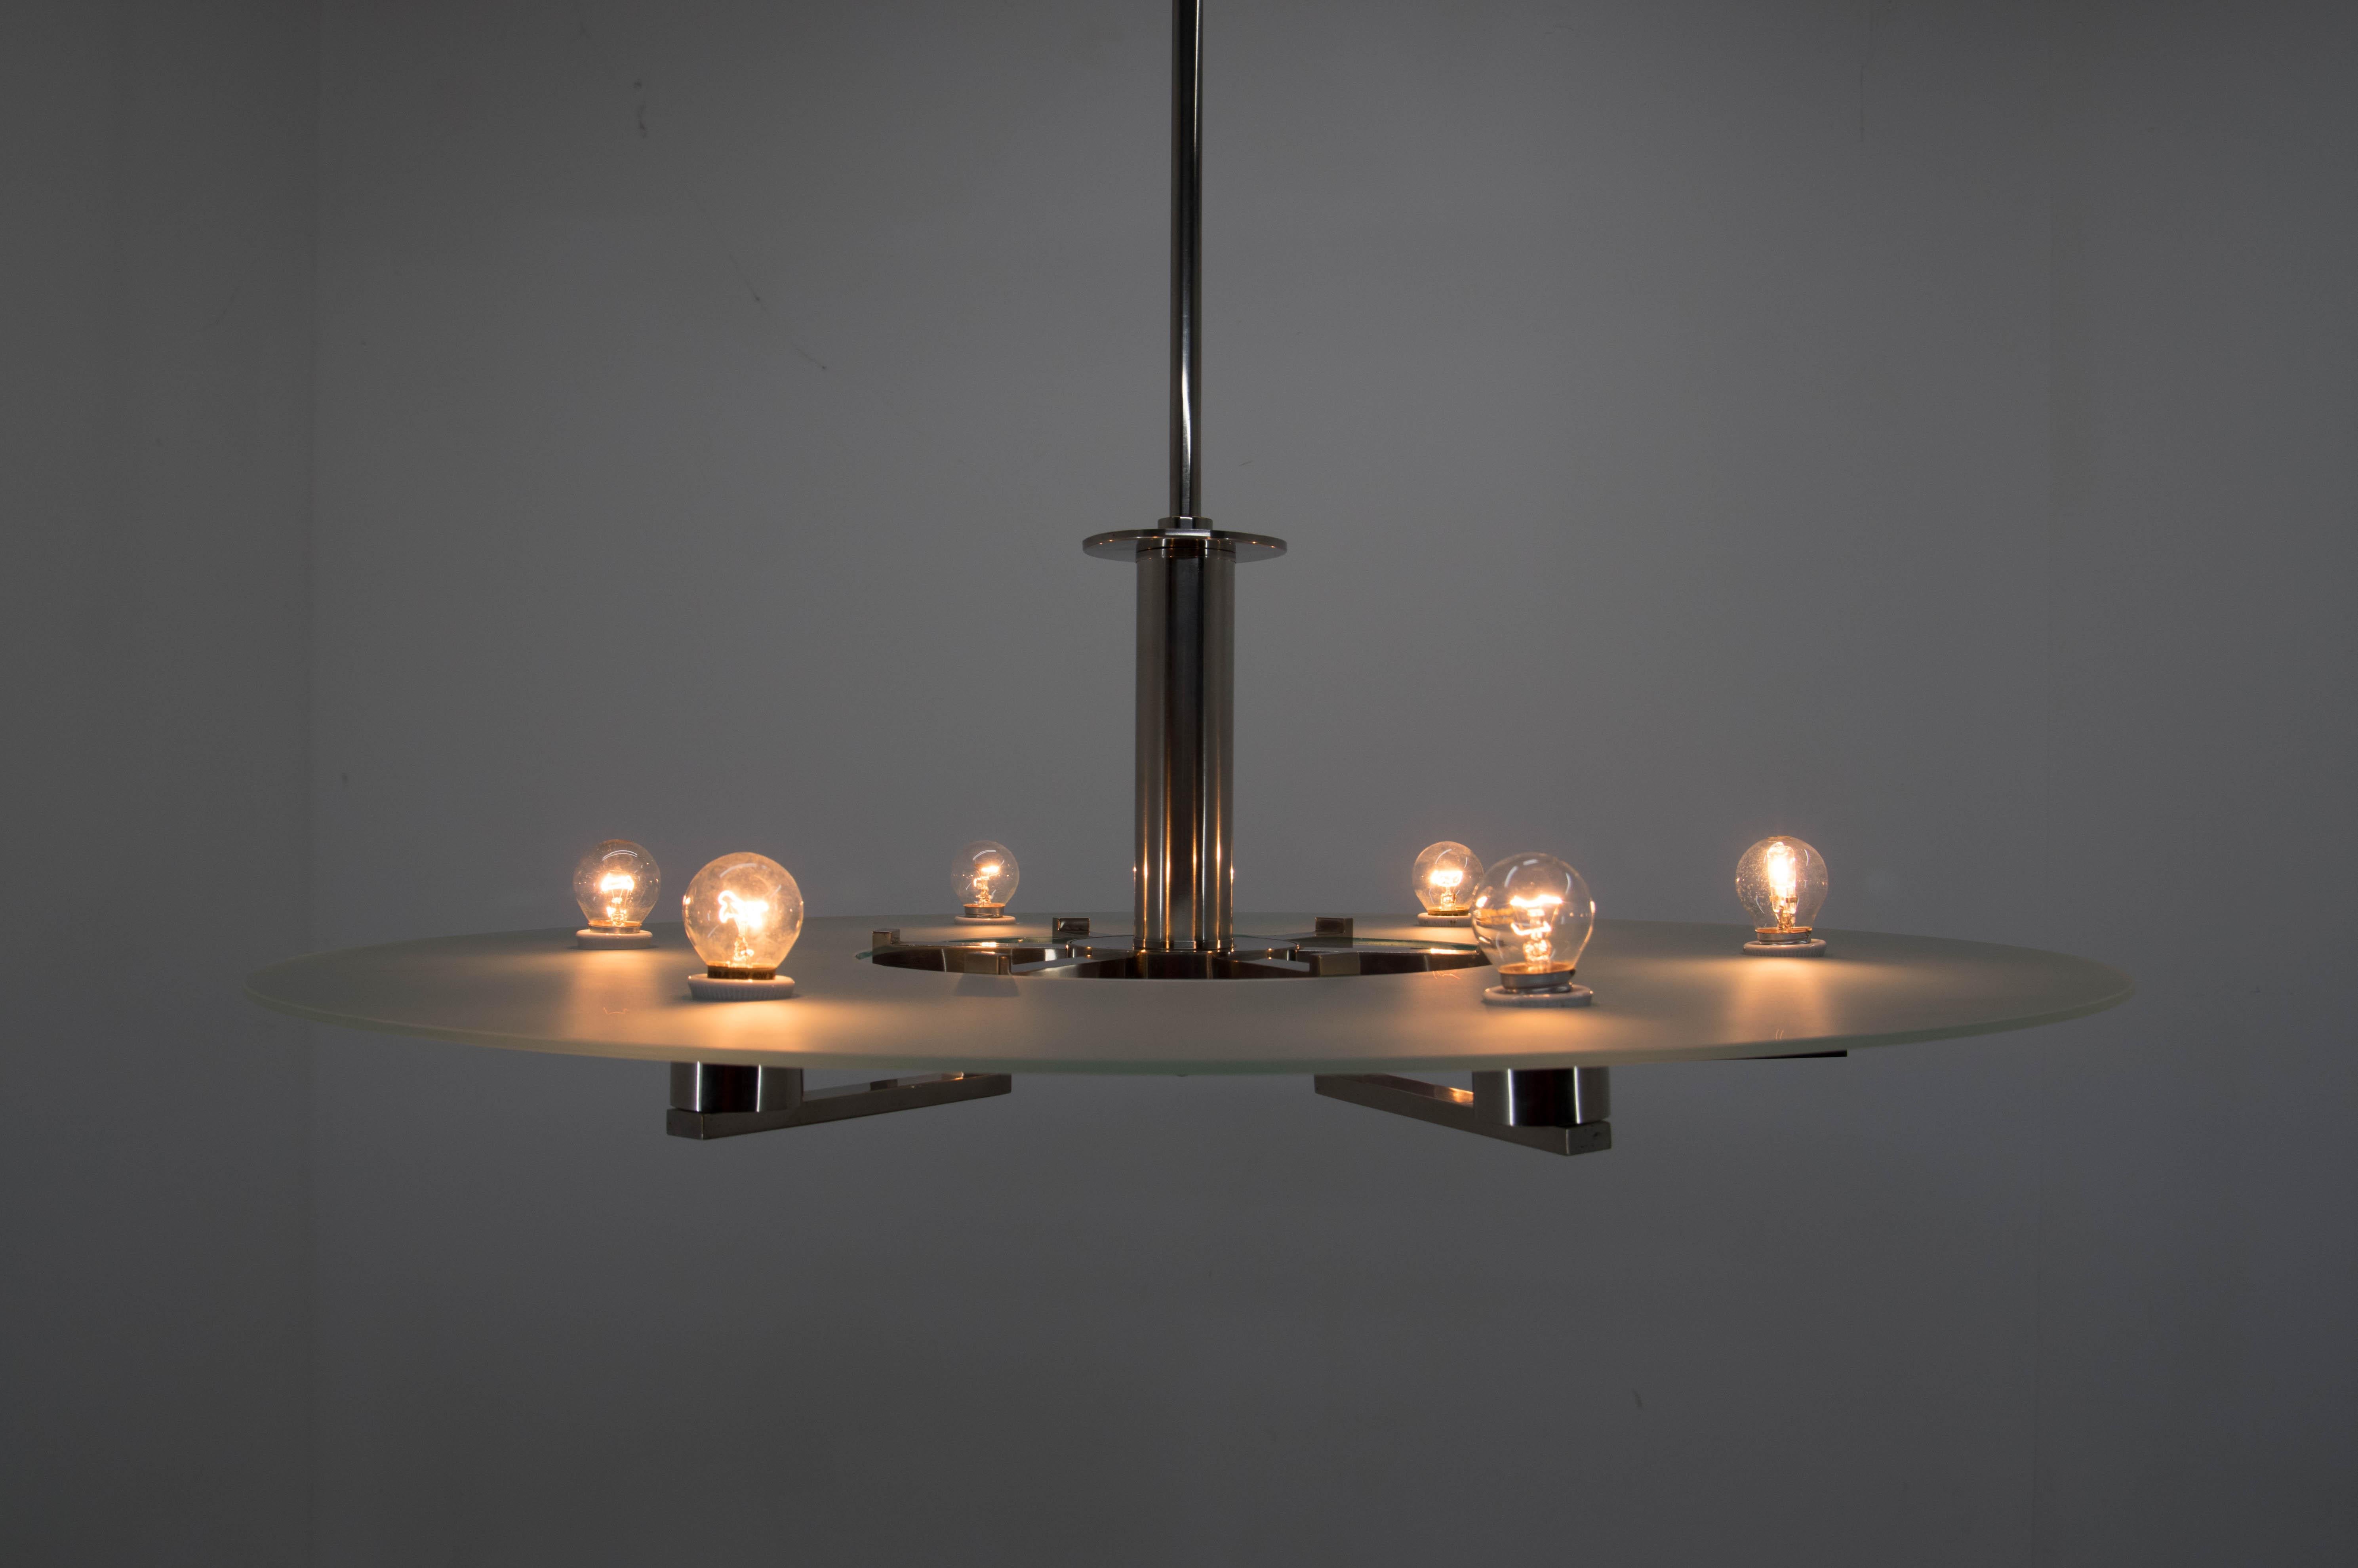 Czech Large Functionalist 6-Flamming Nickel-Plated Chandelier, 1930s